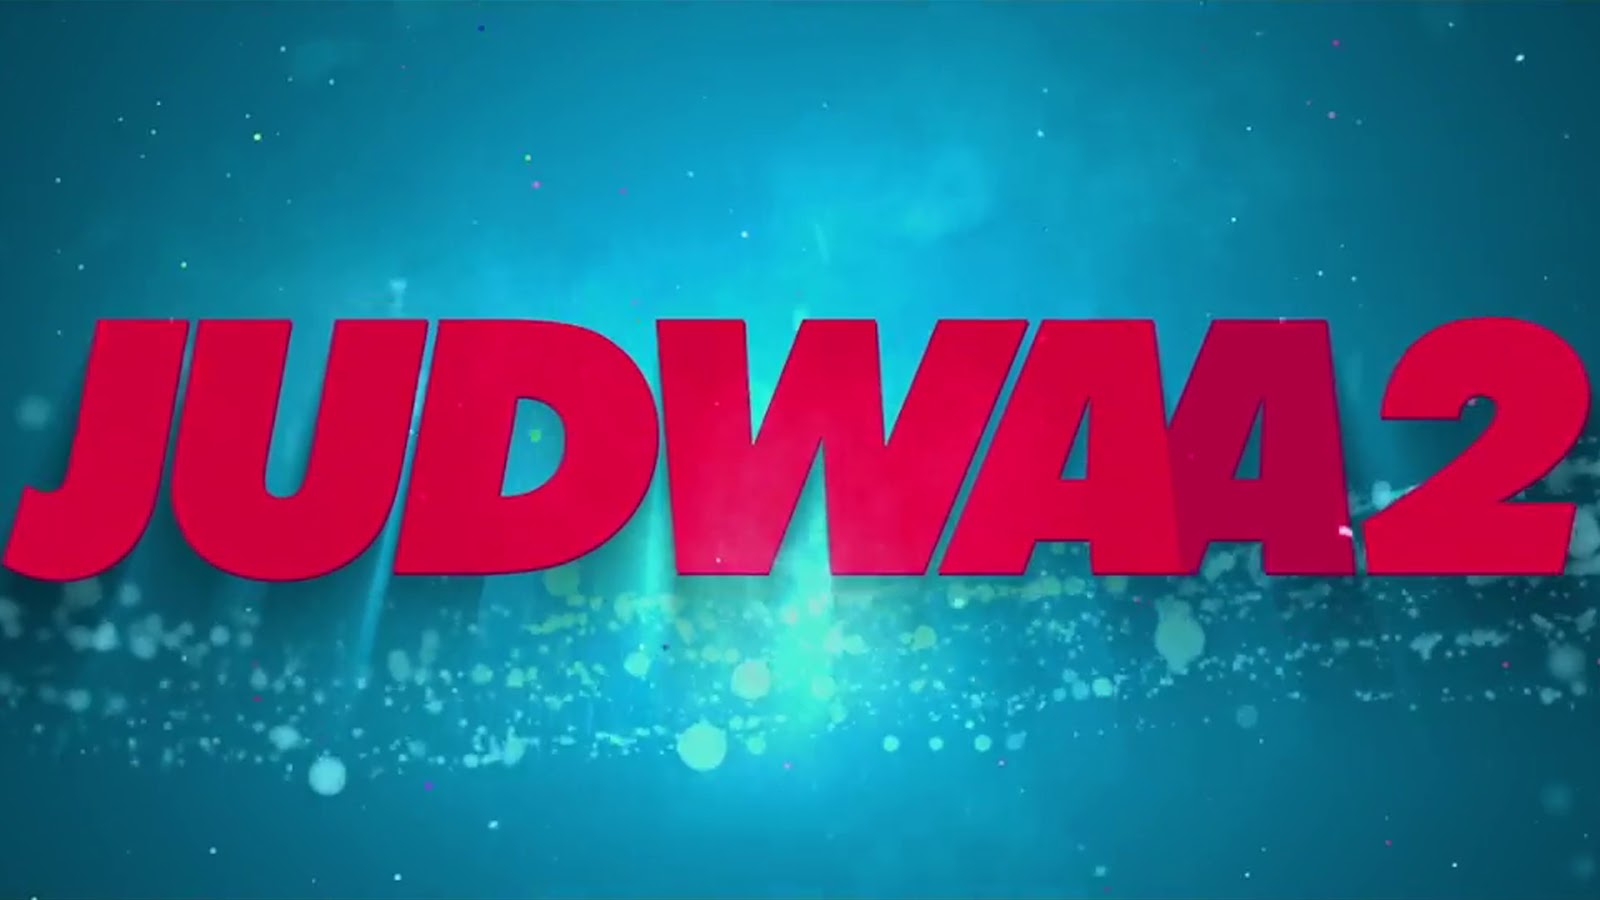 Judwaa 2 Movie Hd Wallpapers Download Free 1080p Colorfullhdwallpapers Upcoming Latest